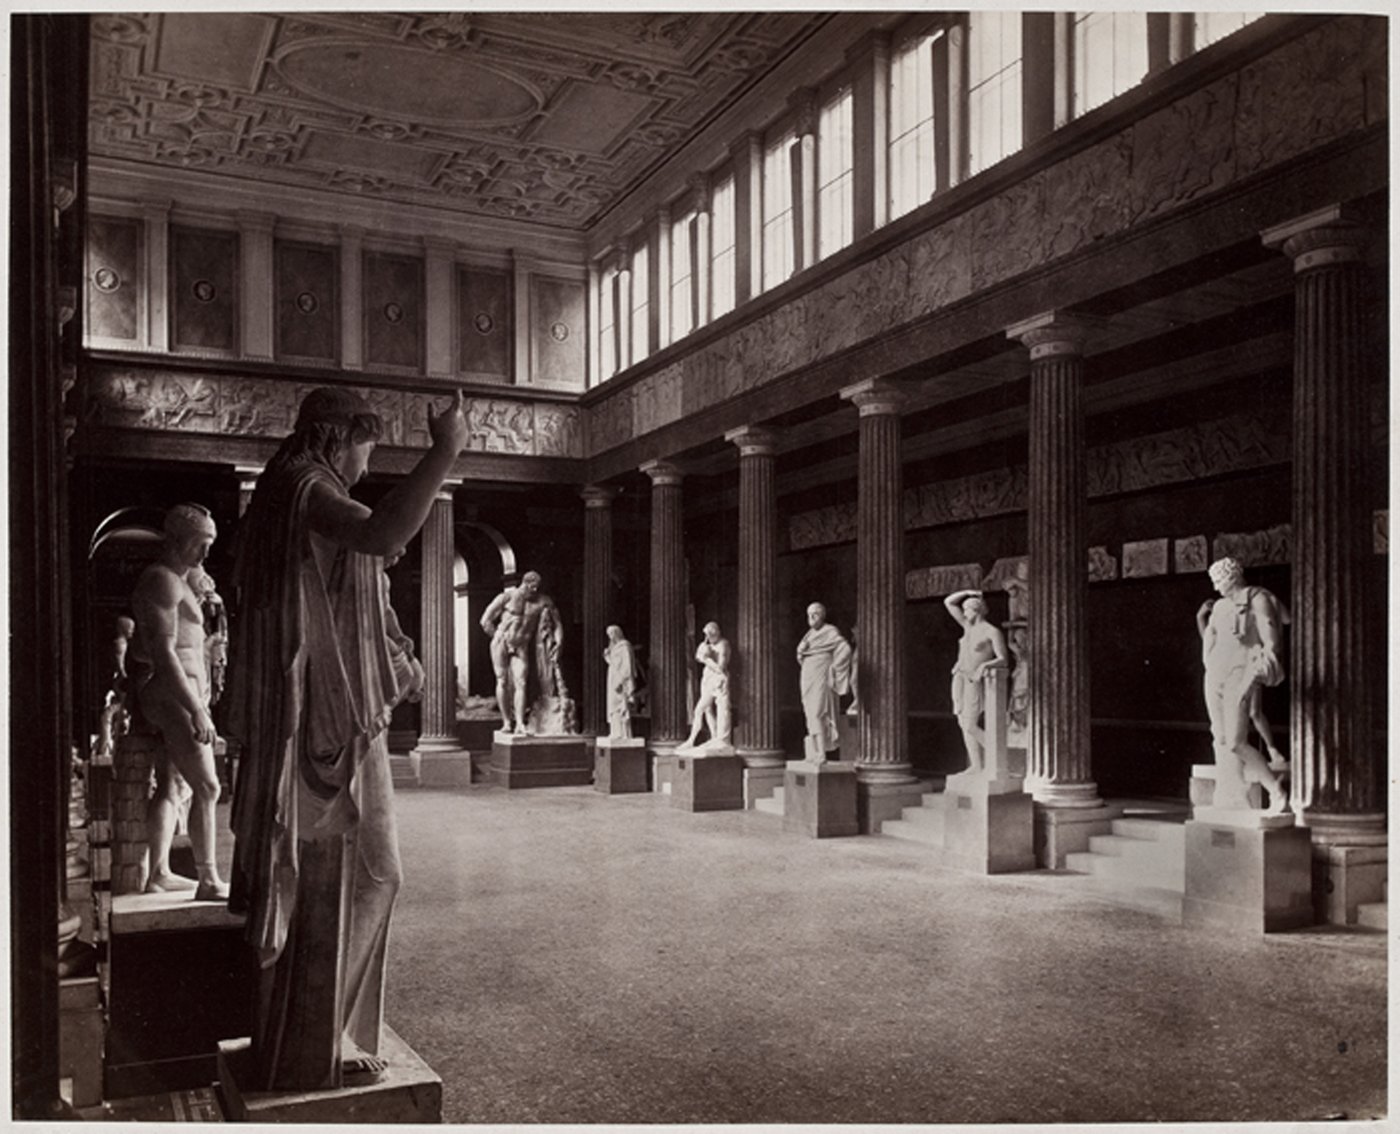 The photograph shows a view of the Academy’s assembly hall, where casts of ancient sculptures were placed.